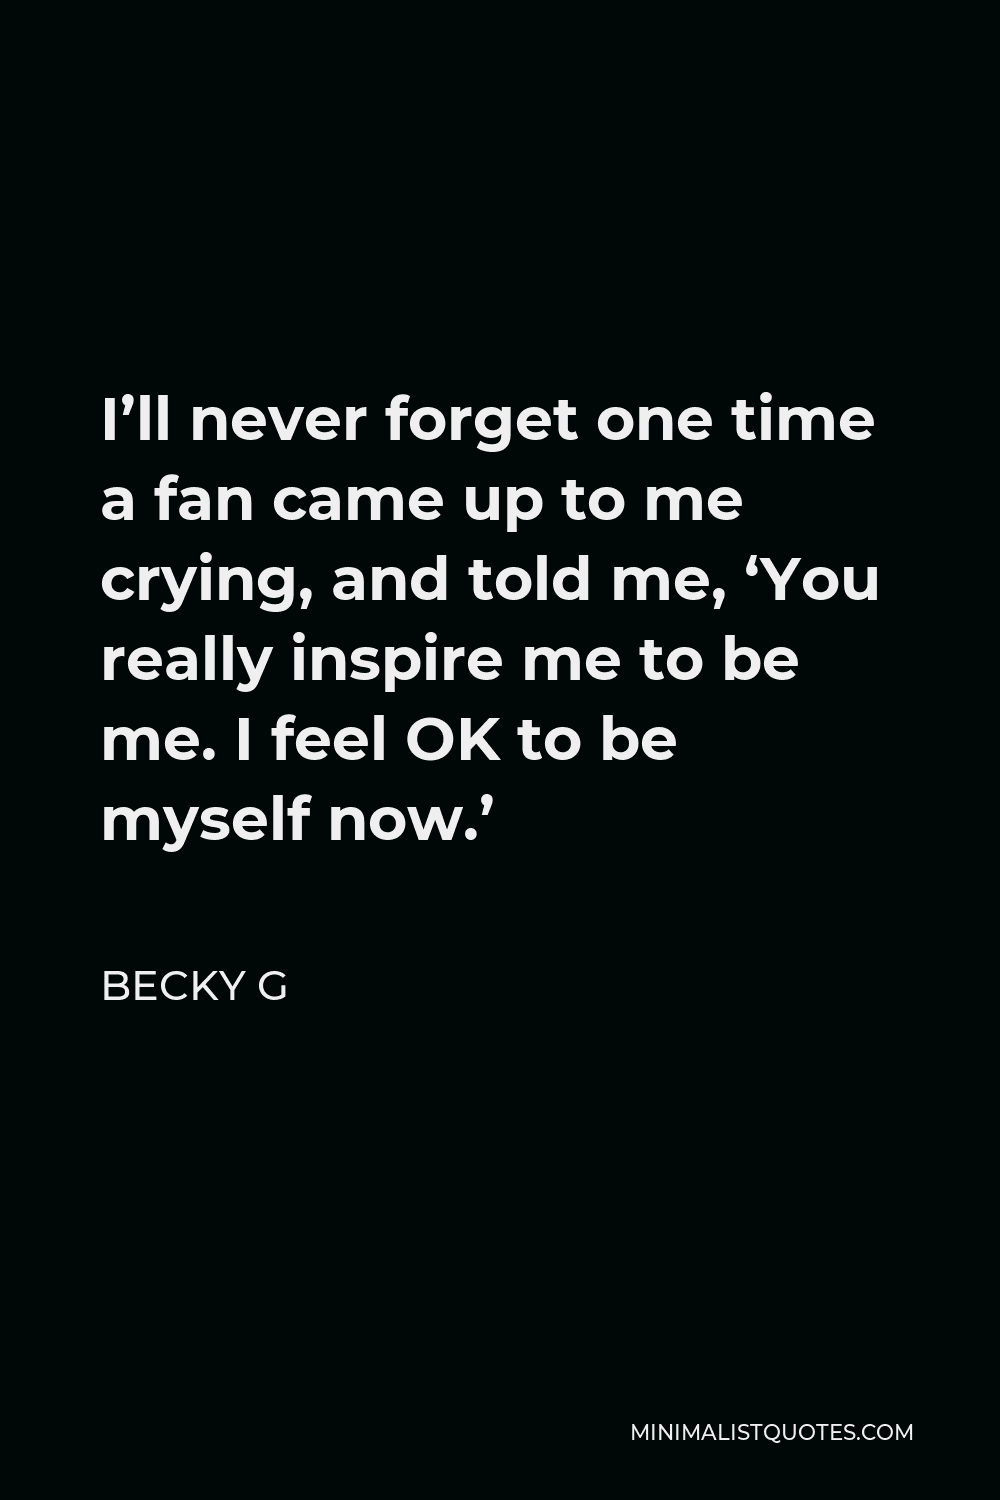 Becky G Quote - I’ll never forget one time a fan came up to me crying, and told me, ‘You really inspire me to be me. I feel OK to be myself now.’